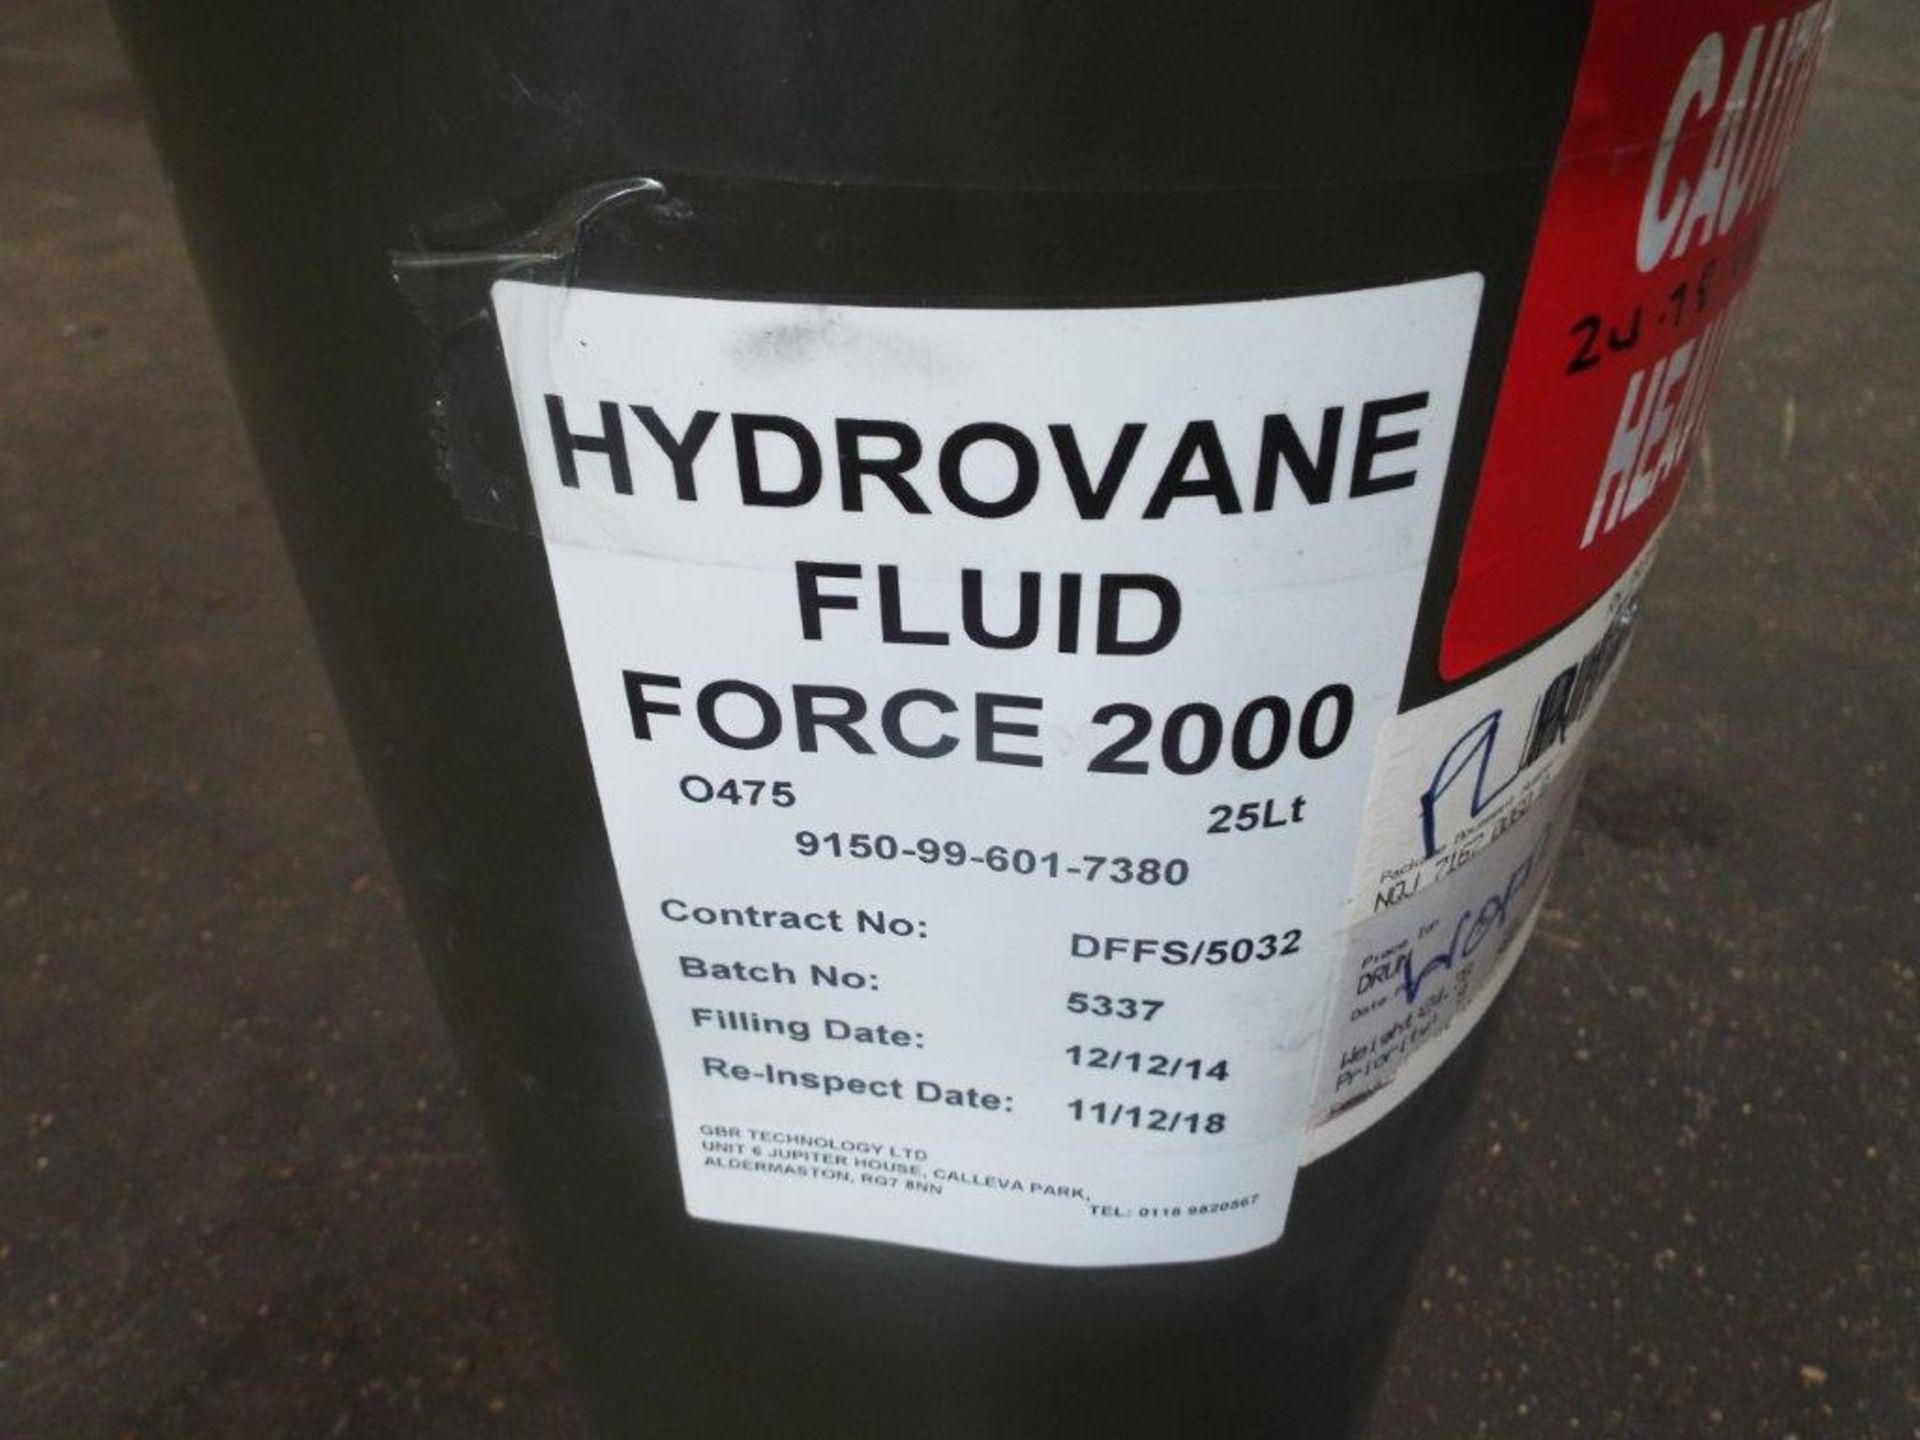 1 x Unissued 25L Drums of Hydrovane Fluid Force 2000 Hydrovane Compressor Oil - Image 2 of 3